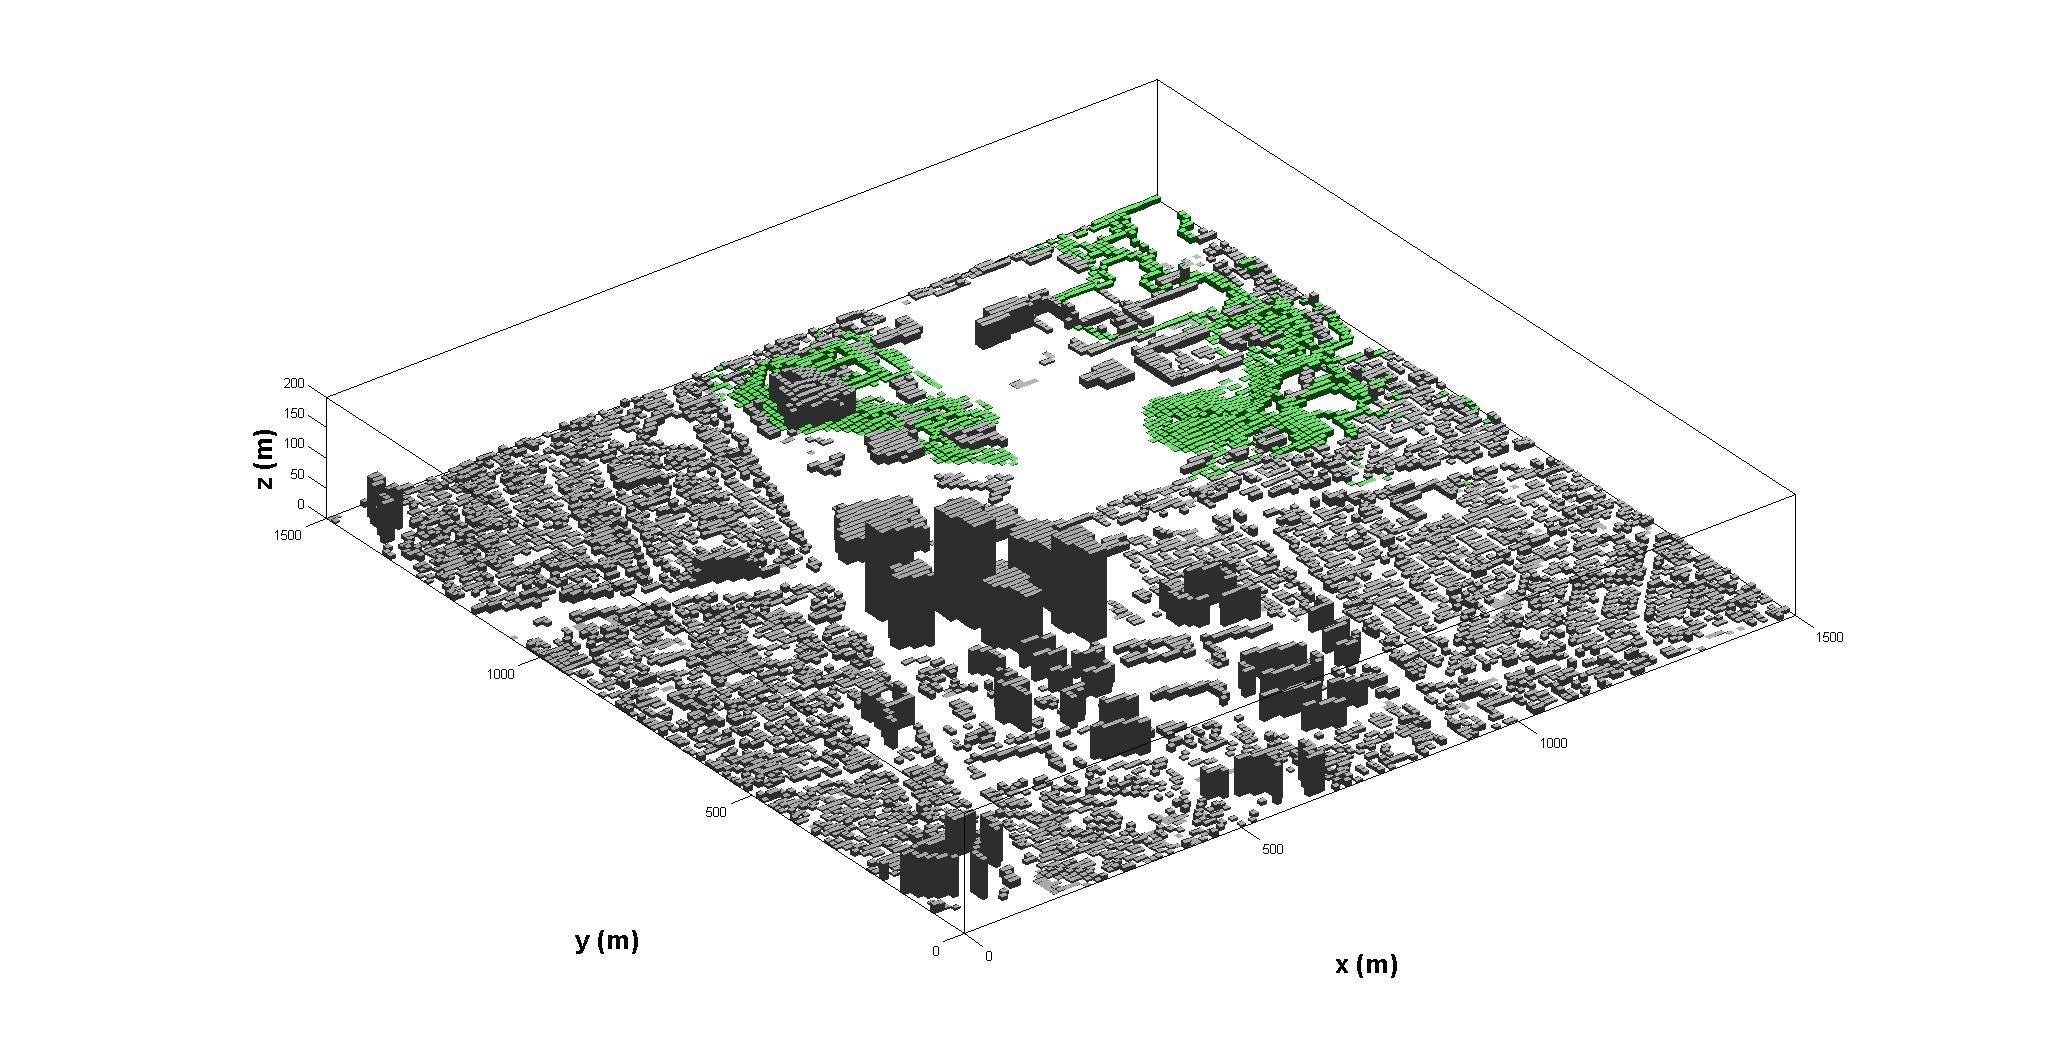 Figure 3.4.11. The 3-dimensional topography of 10m resolution in the CFD model.